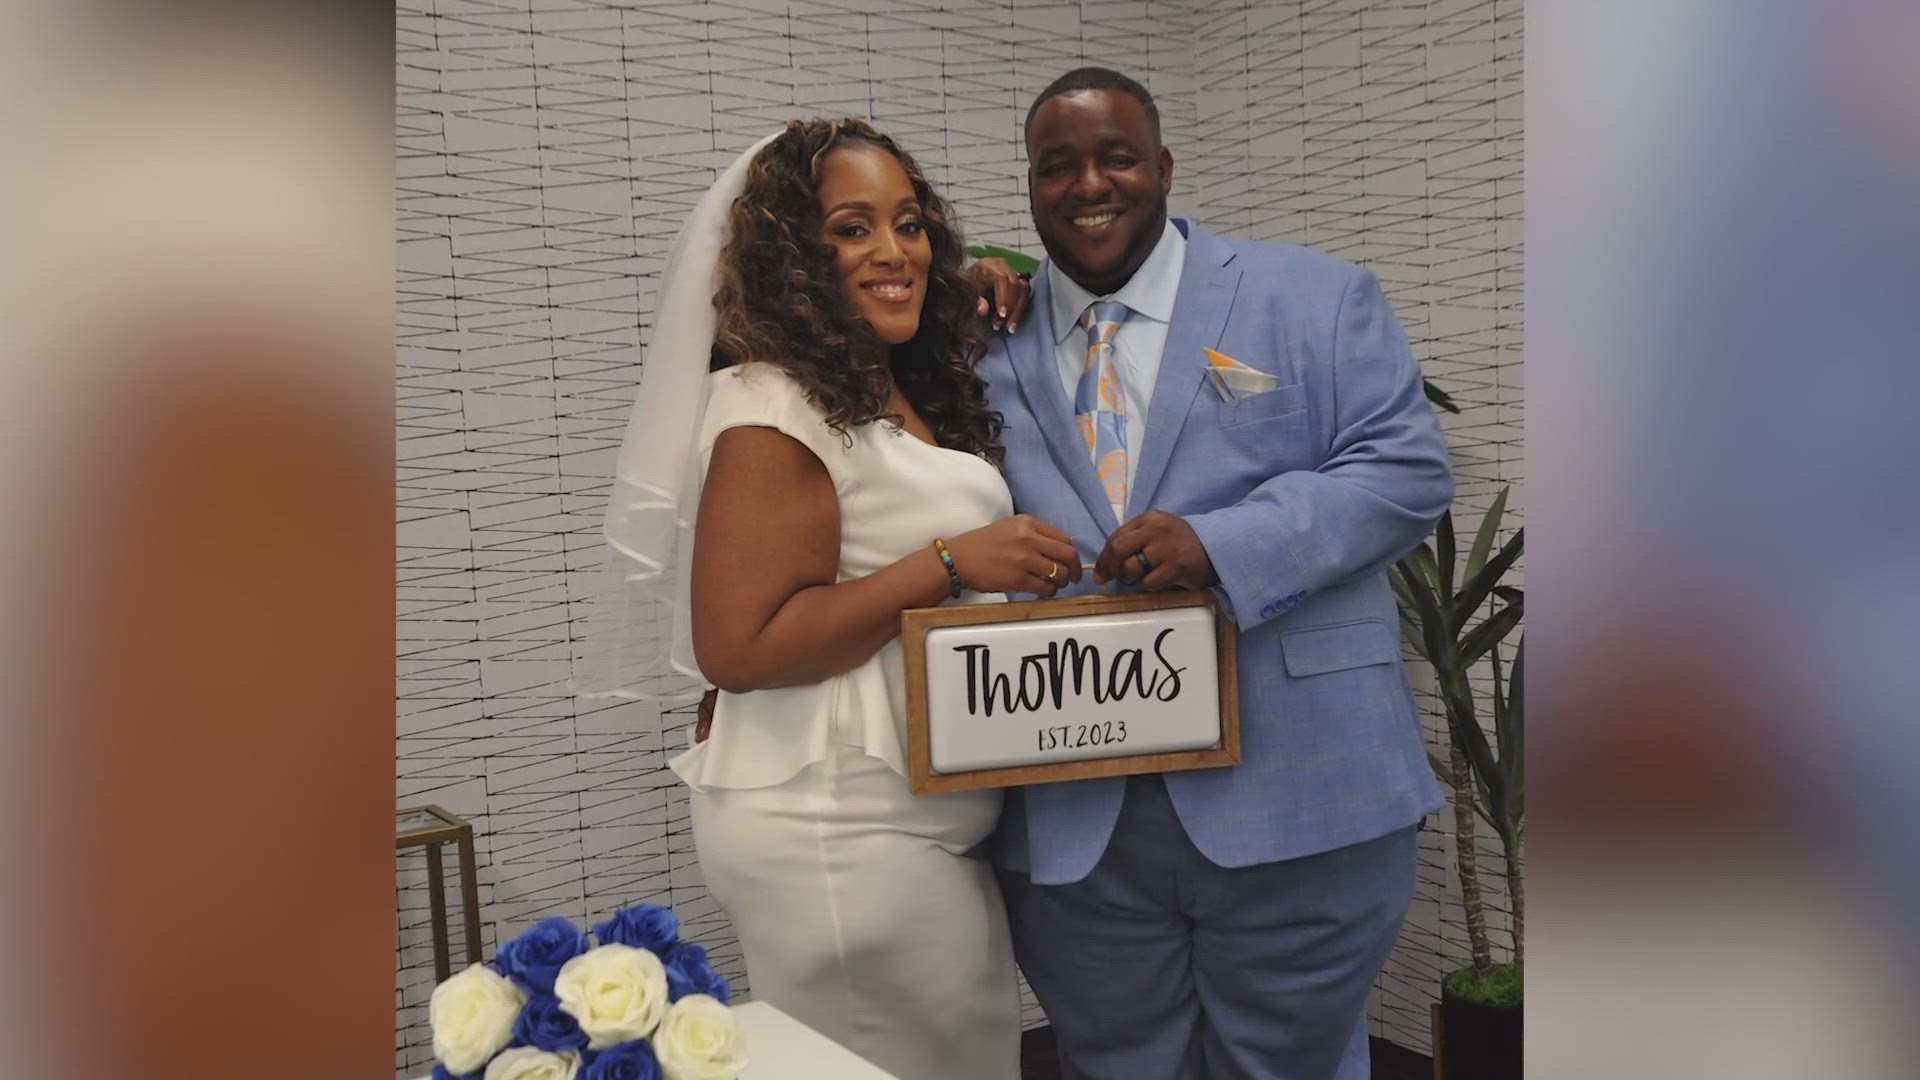 Ronnie and Rachel Thomas got married a few months ago after meeting last year at a food truck in Dallas.